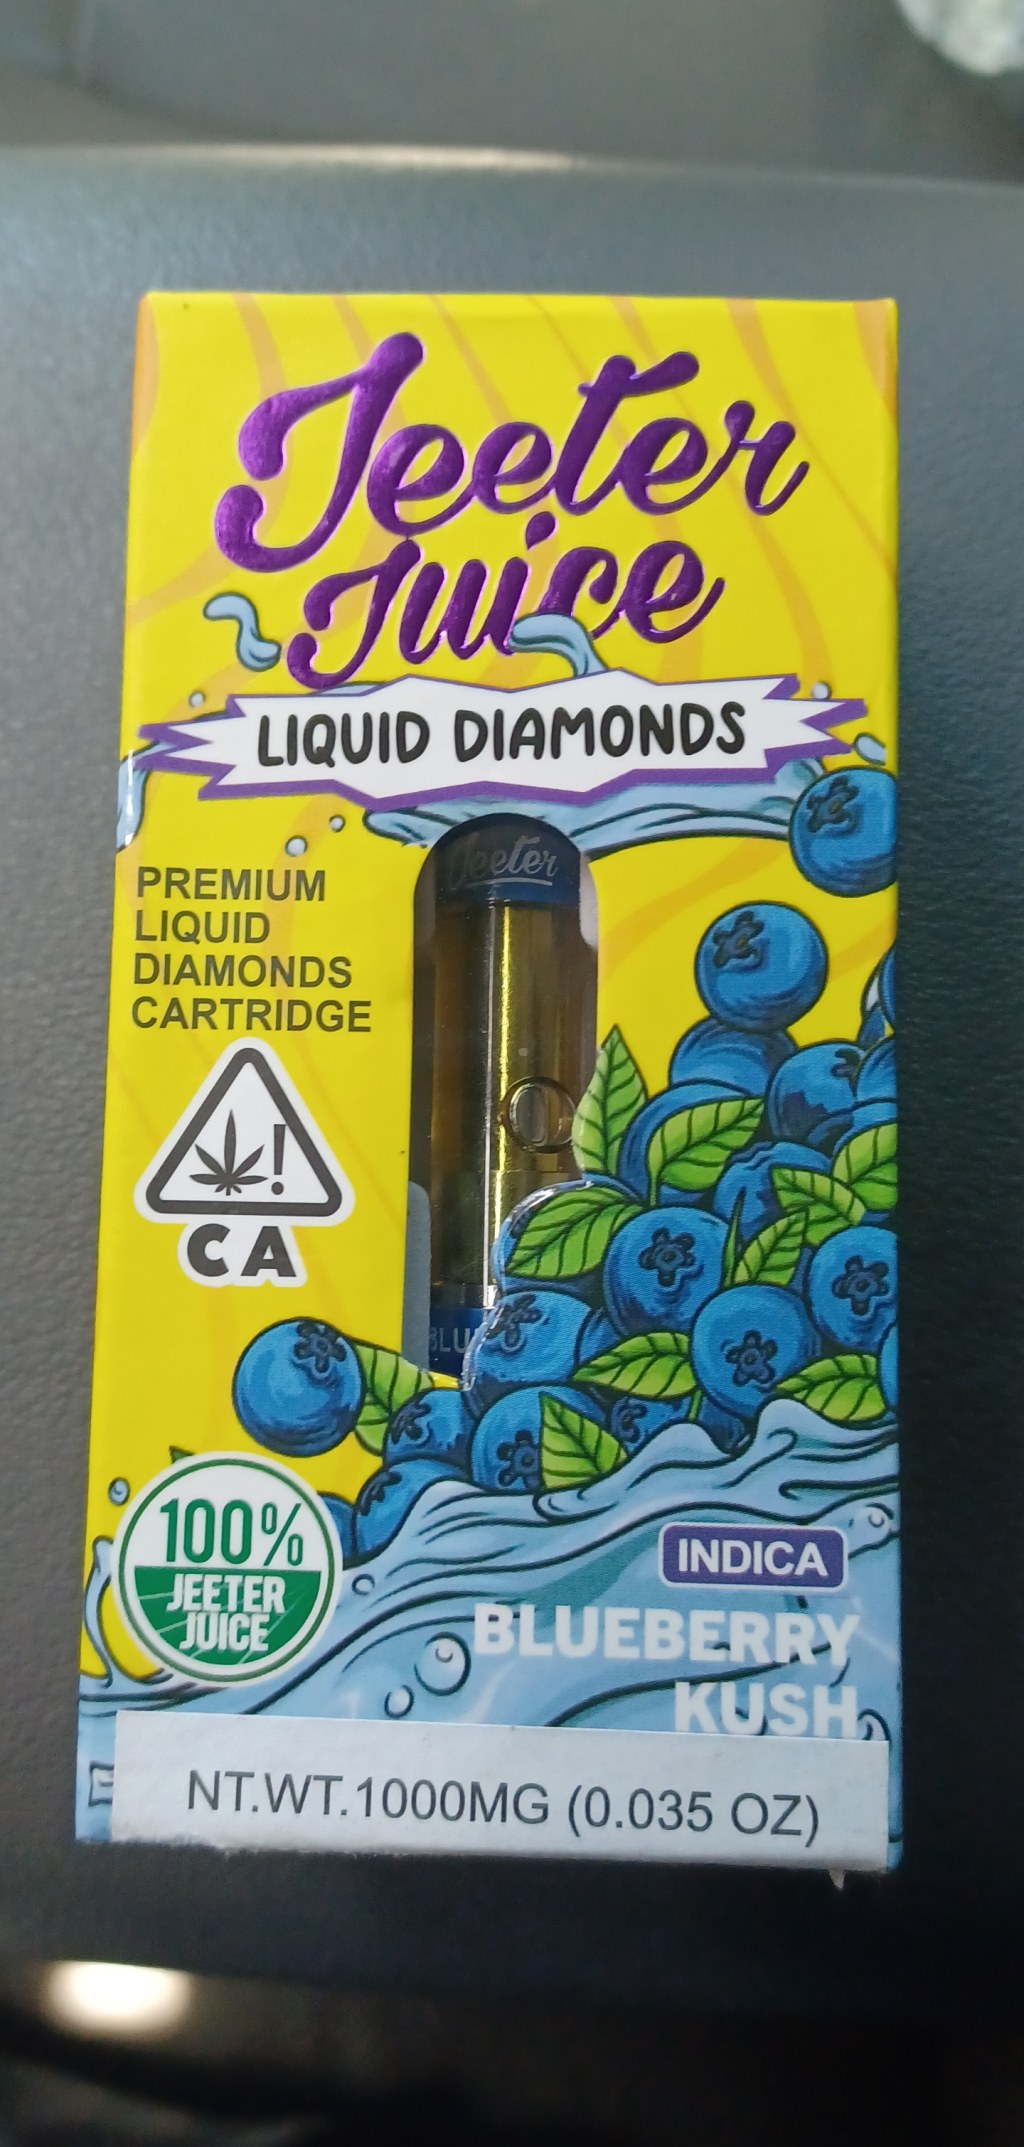 Picture of: Real or fake? Jeeter juice blueberry Kush liquid diamonds : r